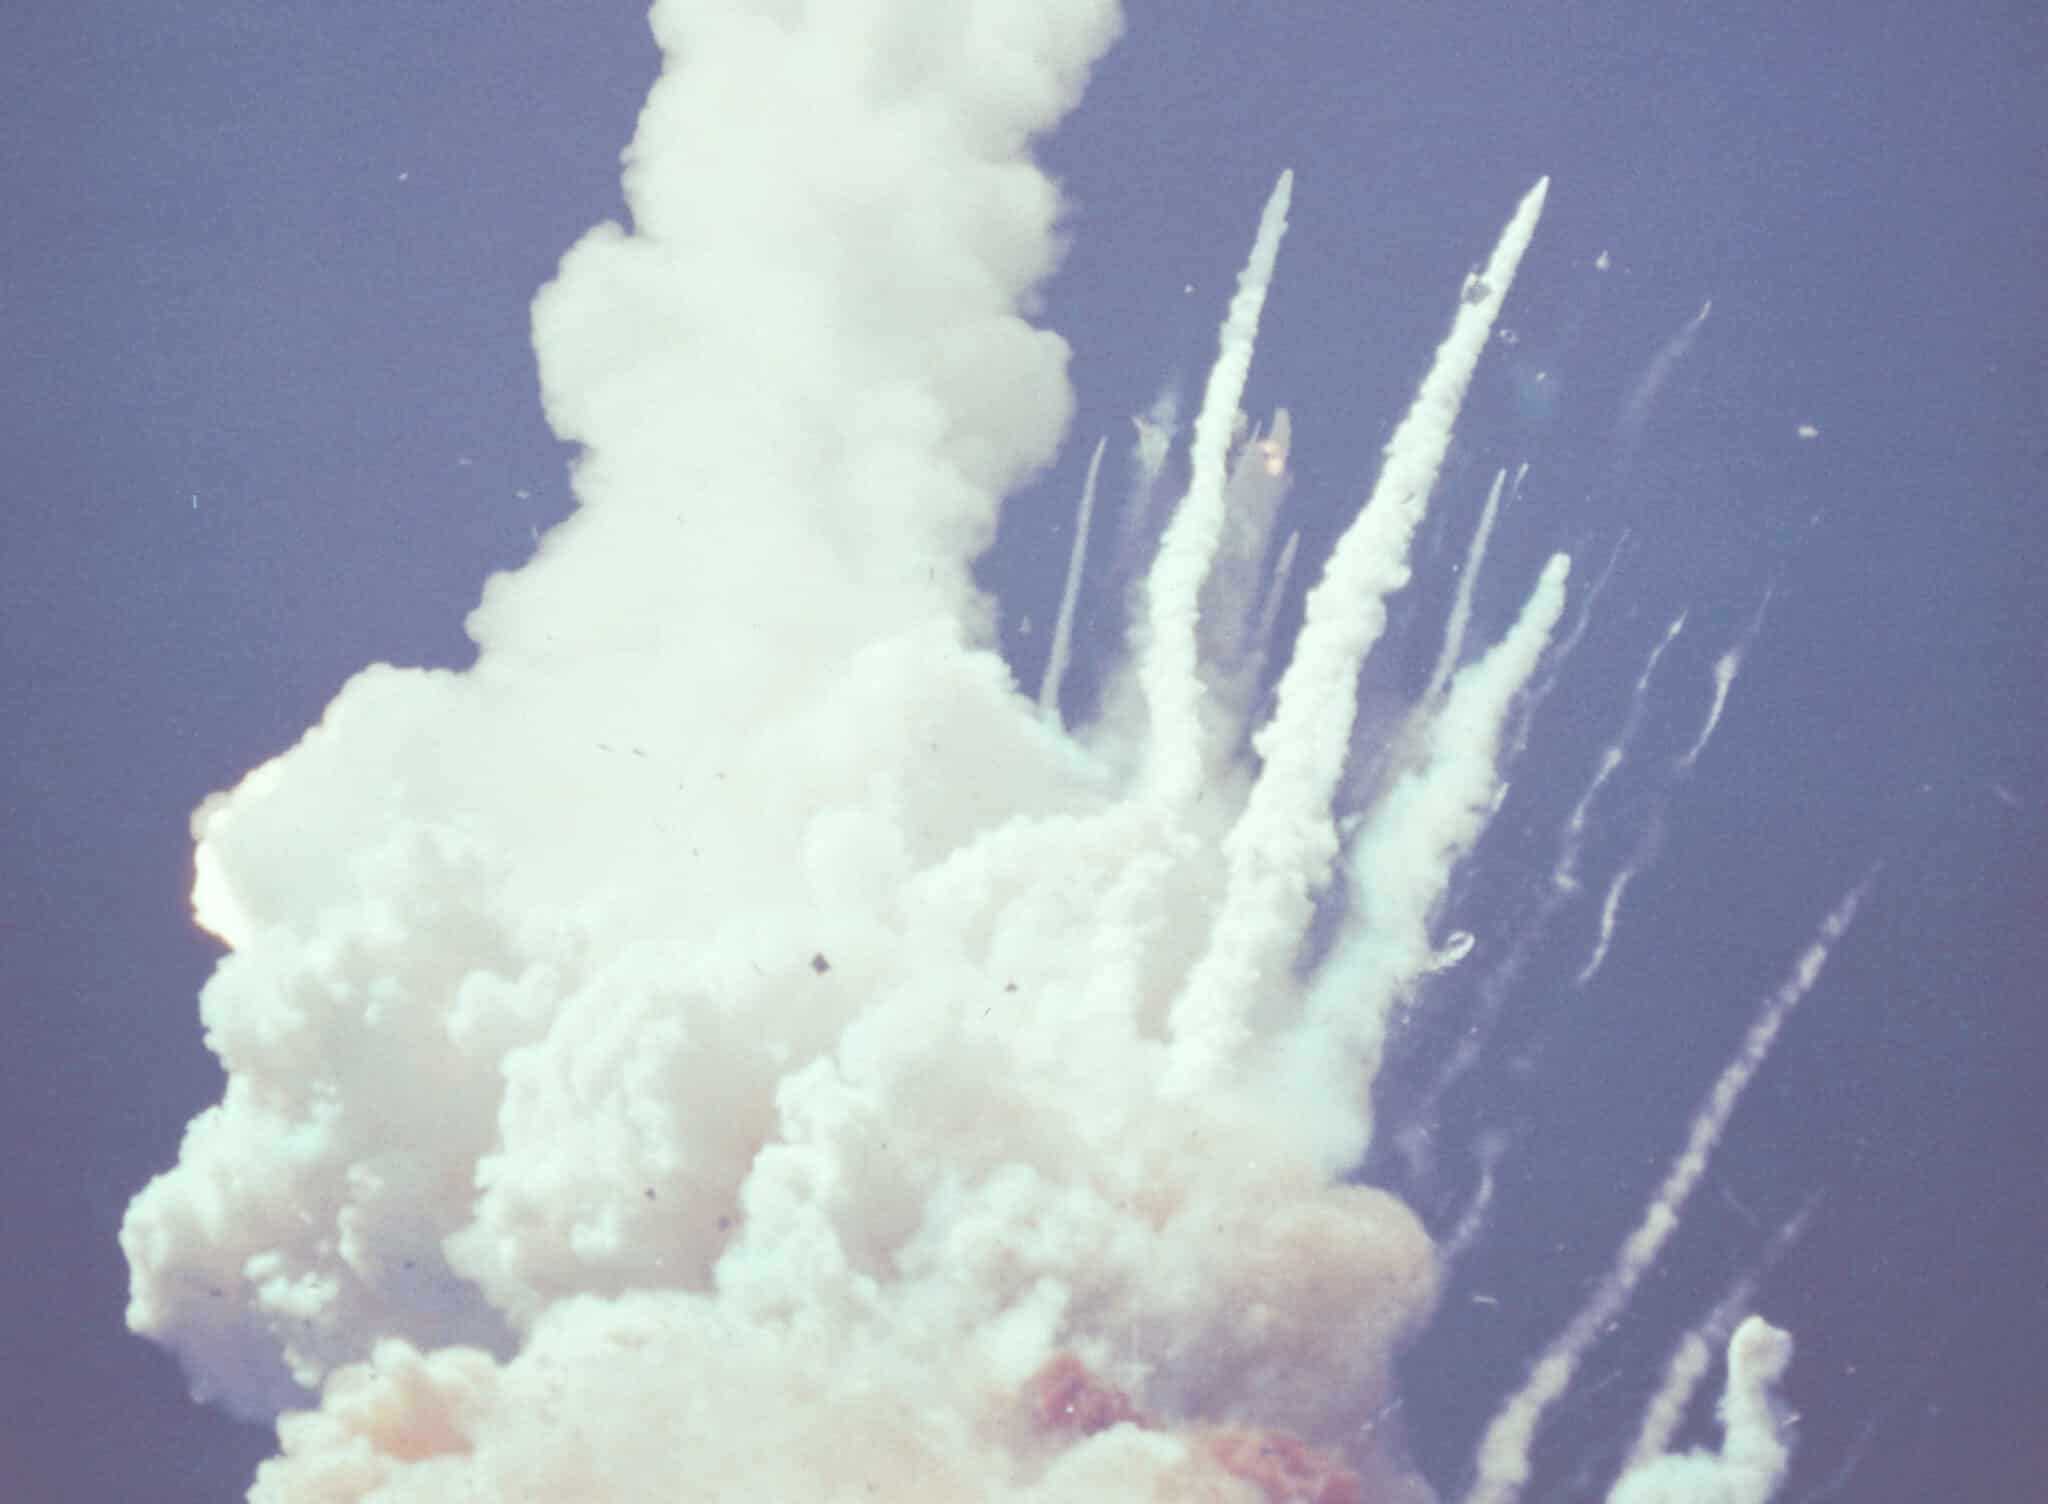 This photo released by NASA, of the 28 January 1986 explosion which destroyed the Space shuttle Challenger and killed all seven crew members 75 seconds after its launch, appears to show a second explosion. (Photo by NASA / AFP) (Photo by -/NASA/AFP via Getty Images)